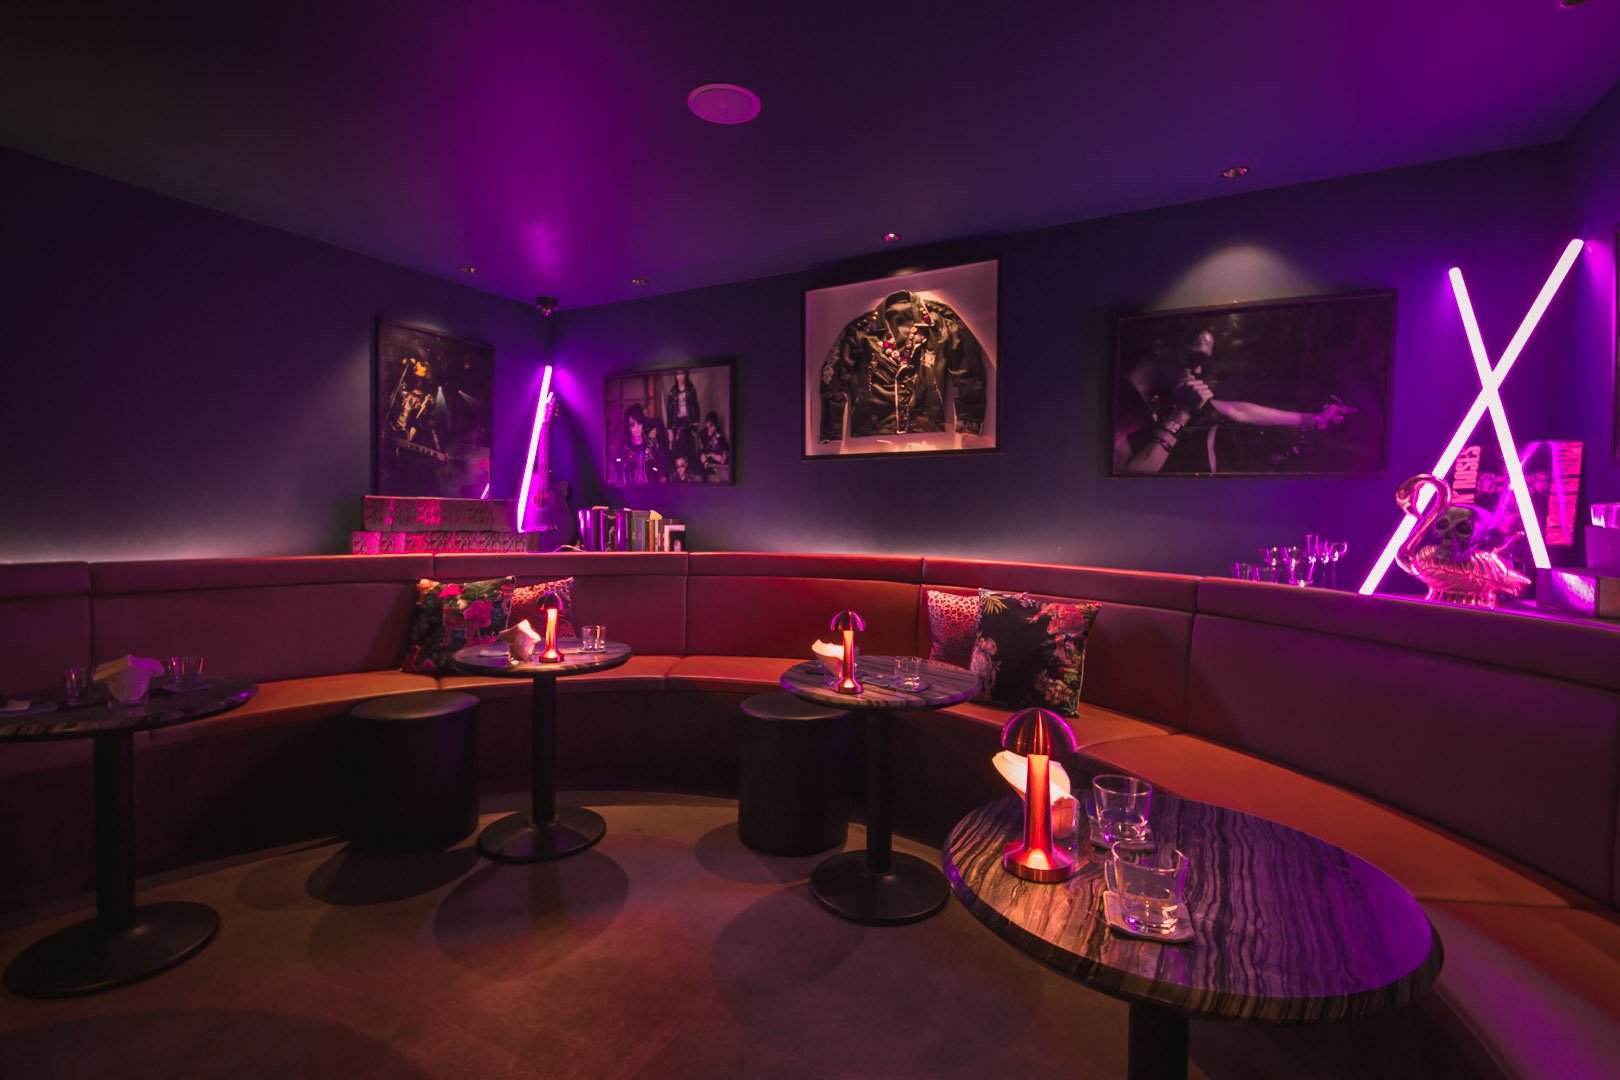 Stay Gold, the rebellious cocktail bar exuding a rock and roll spirit.